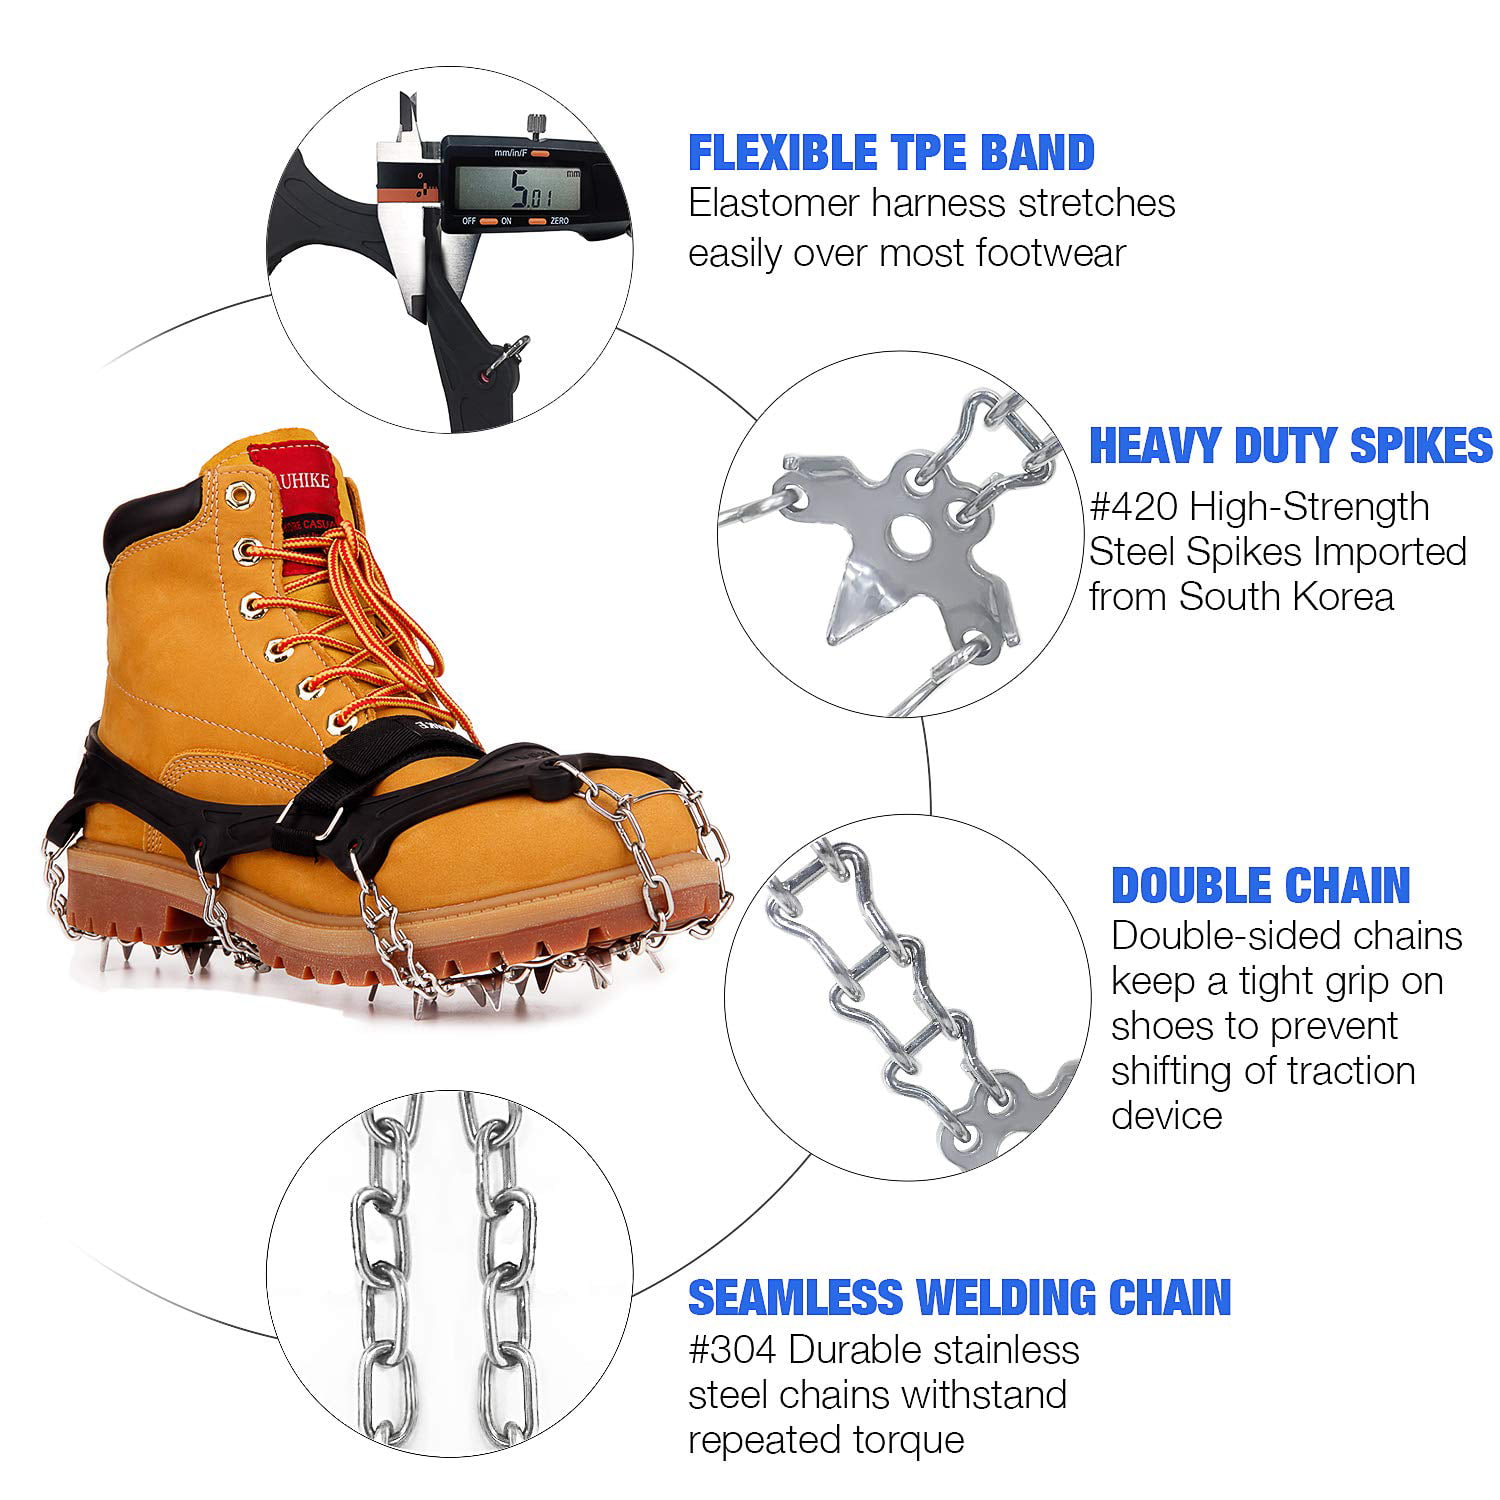 AUHIKE Upgraded Version 19 Spikes Traction Cleats Ice Snow Grips with Tear-Resistant Gasket Seamless Welded Steel Safe Protect,Crampons for Hiking Fishing Jogging Mountaineering Walking 